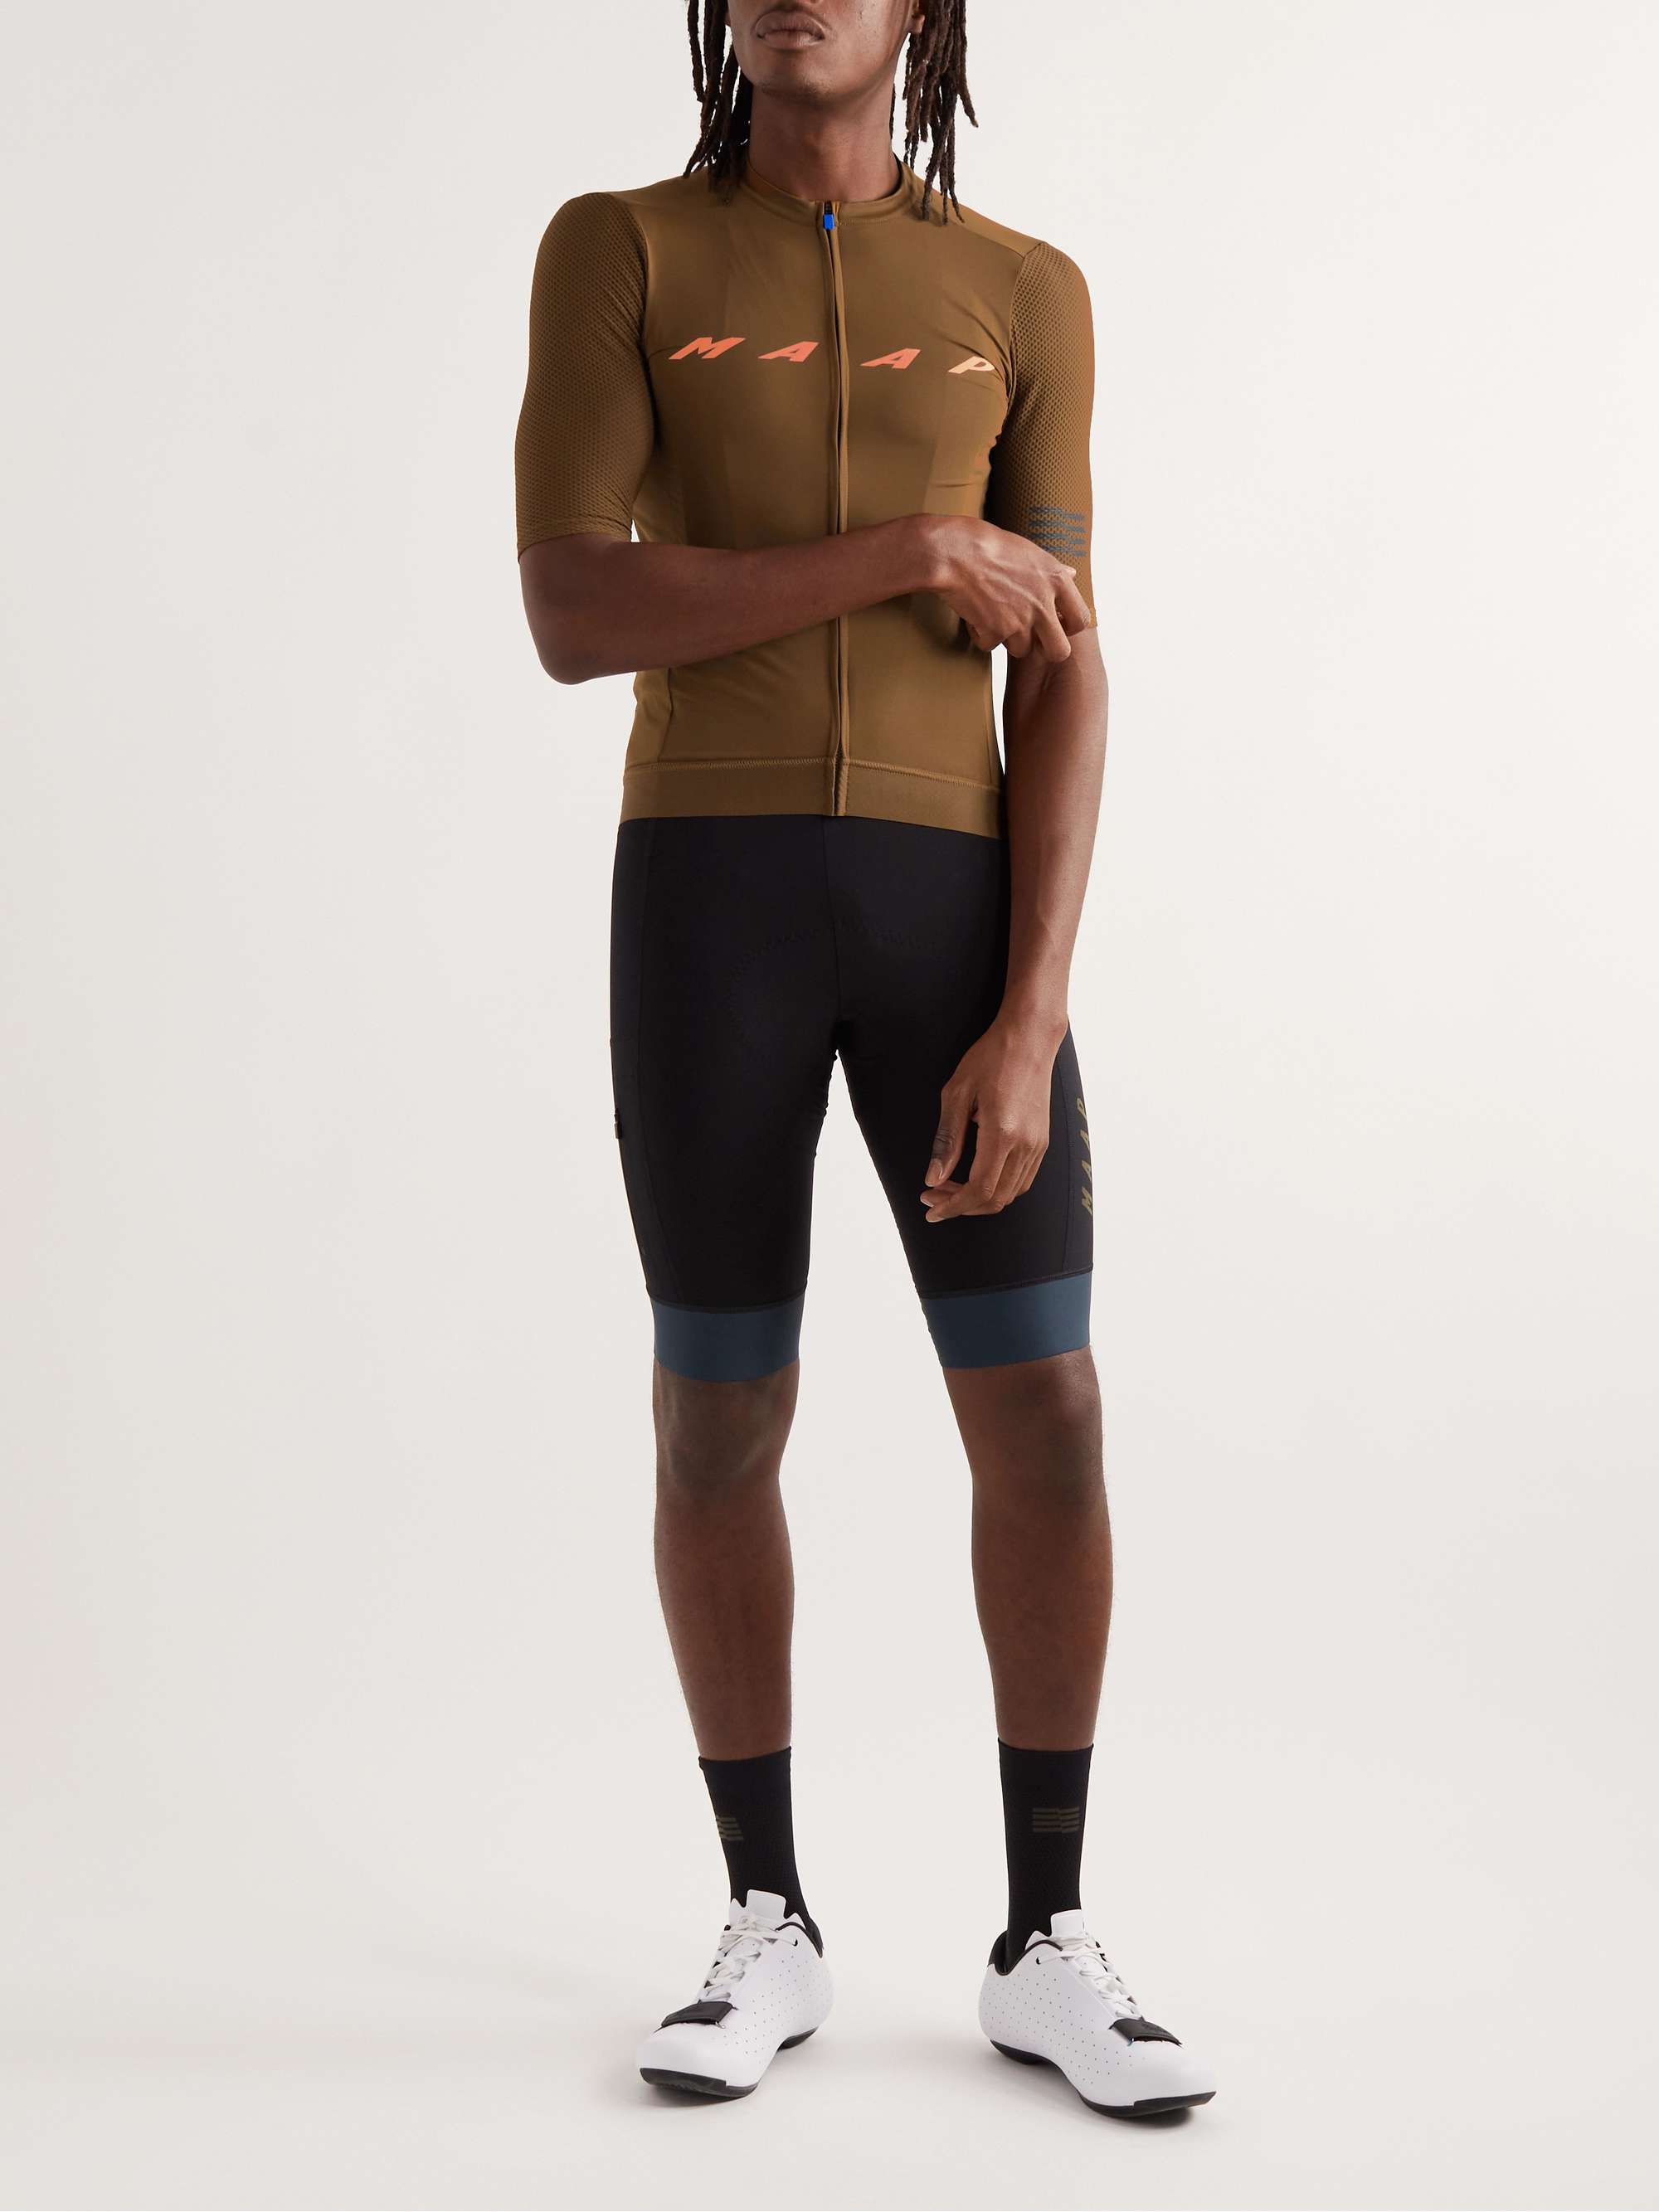 MAAP Evade Pro Cycling Jersey for Men | MR PORTER